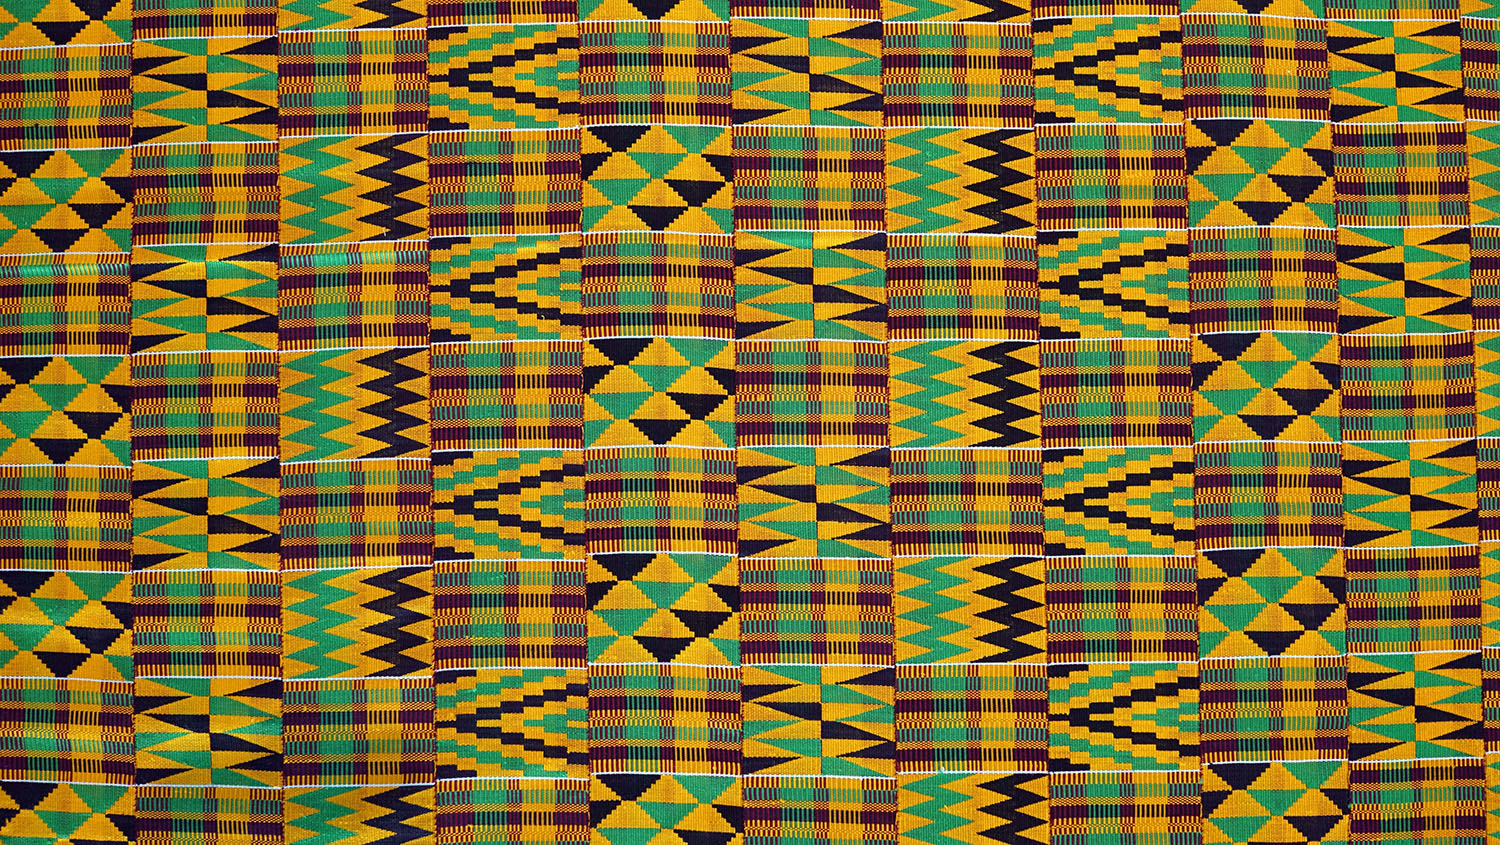 Kente Cloth  Definition, History & Significance - Video & Lesson